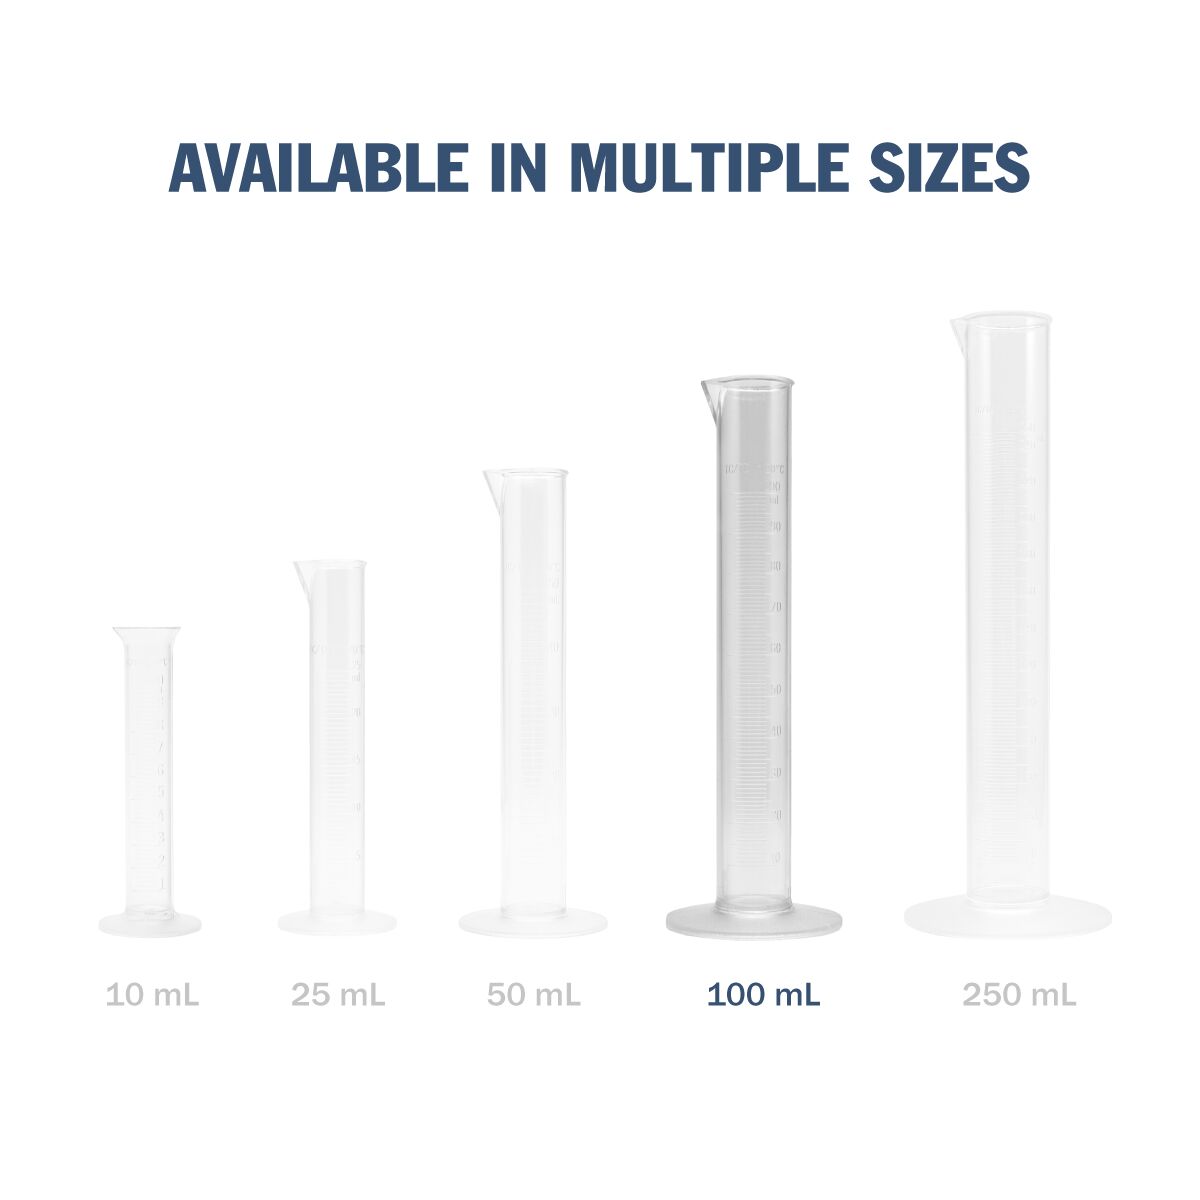 Transparent &amp; Autoclavable Graduated Cylinder available in multiple sizes - 100 mL